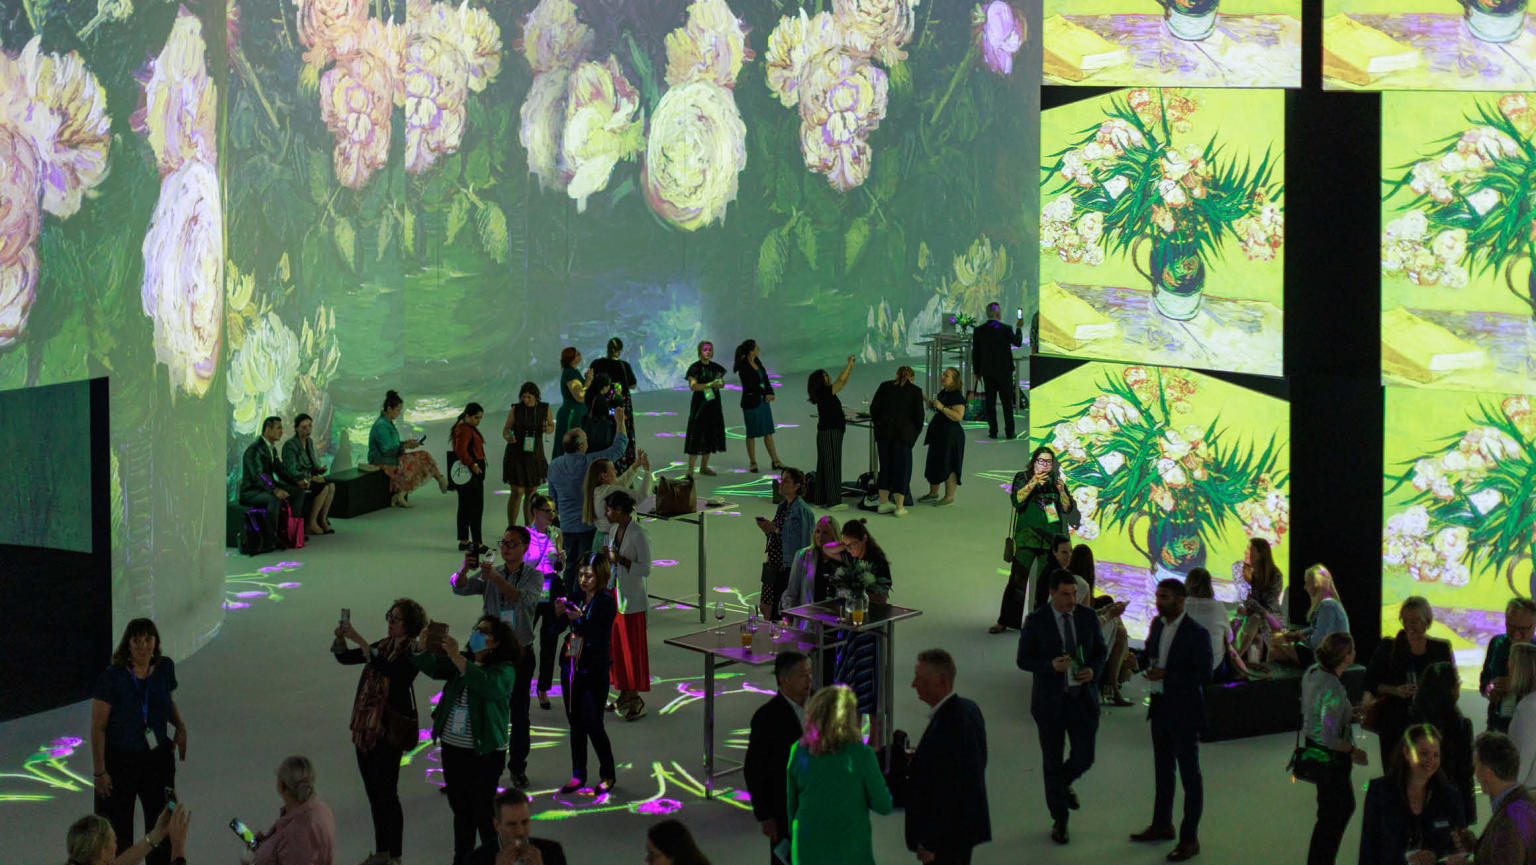 A large gathering of individuals congregated within a room adorned with expansive screens. The screens showcase vibrant yellow floral artwork, creating an immersive and visually captivating environment.